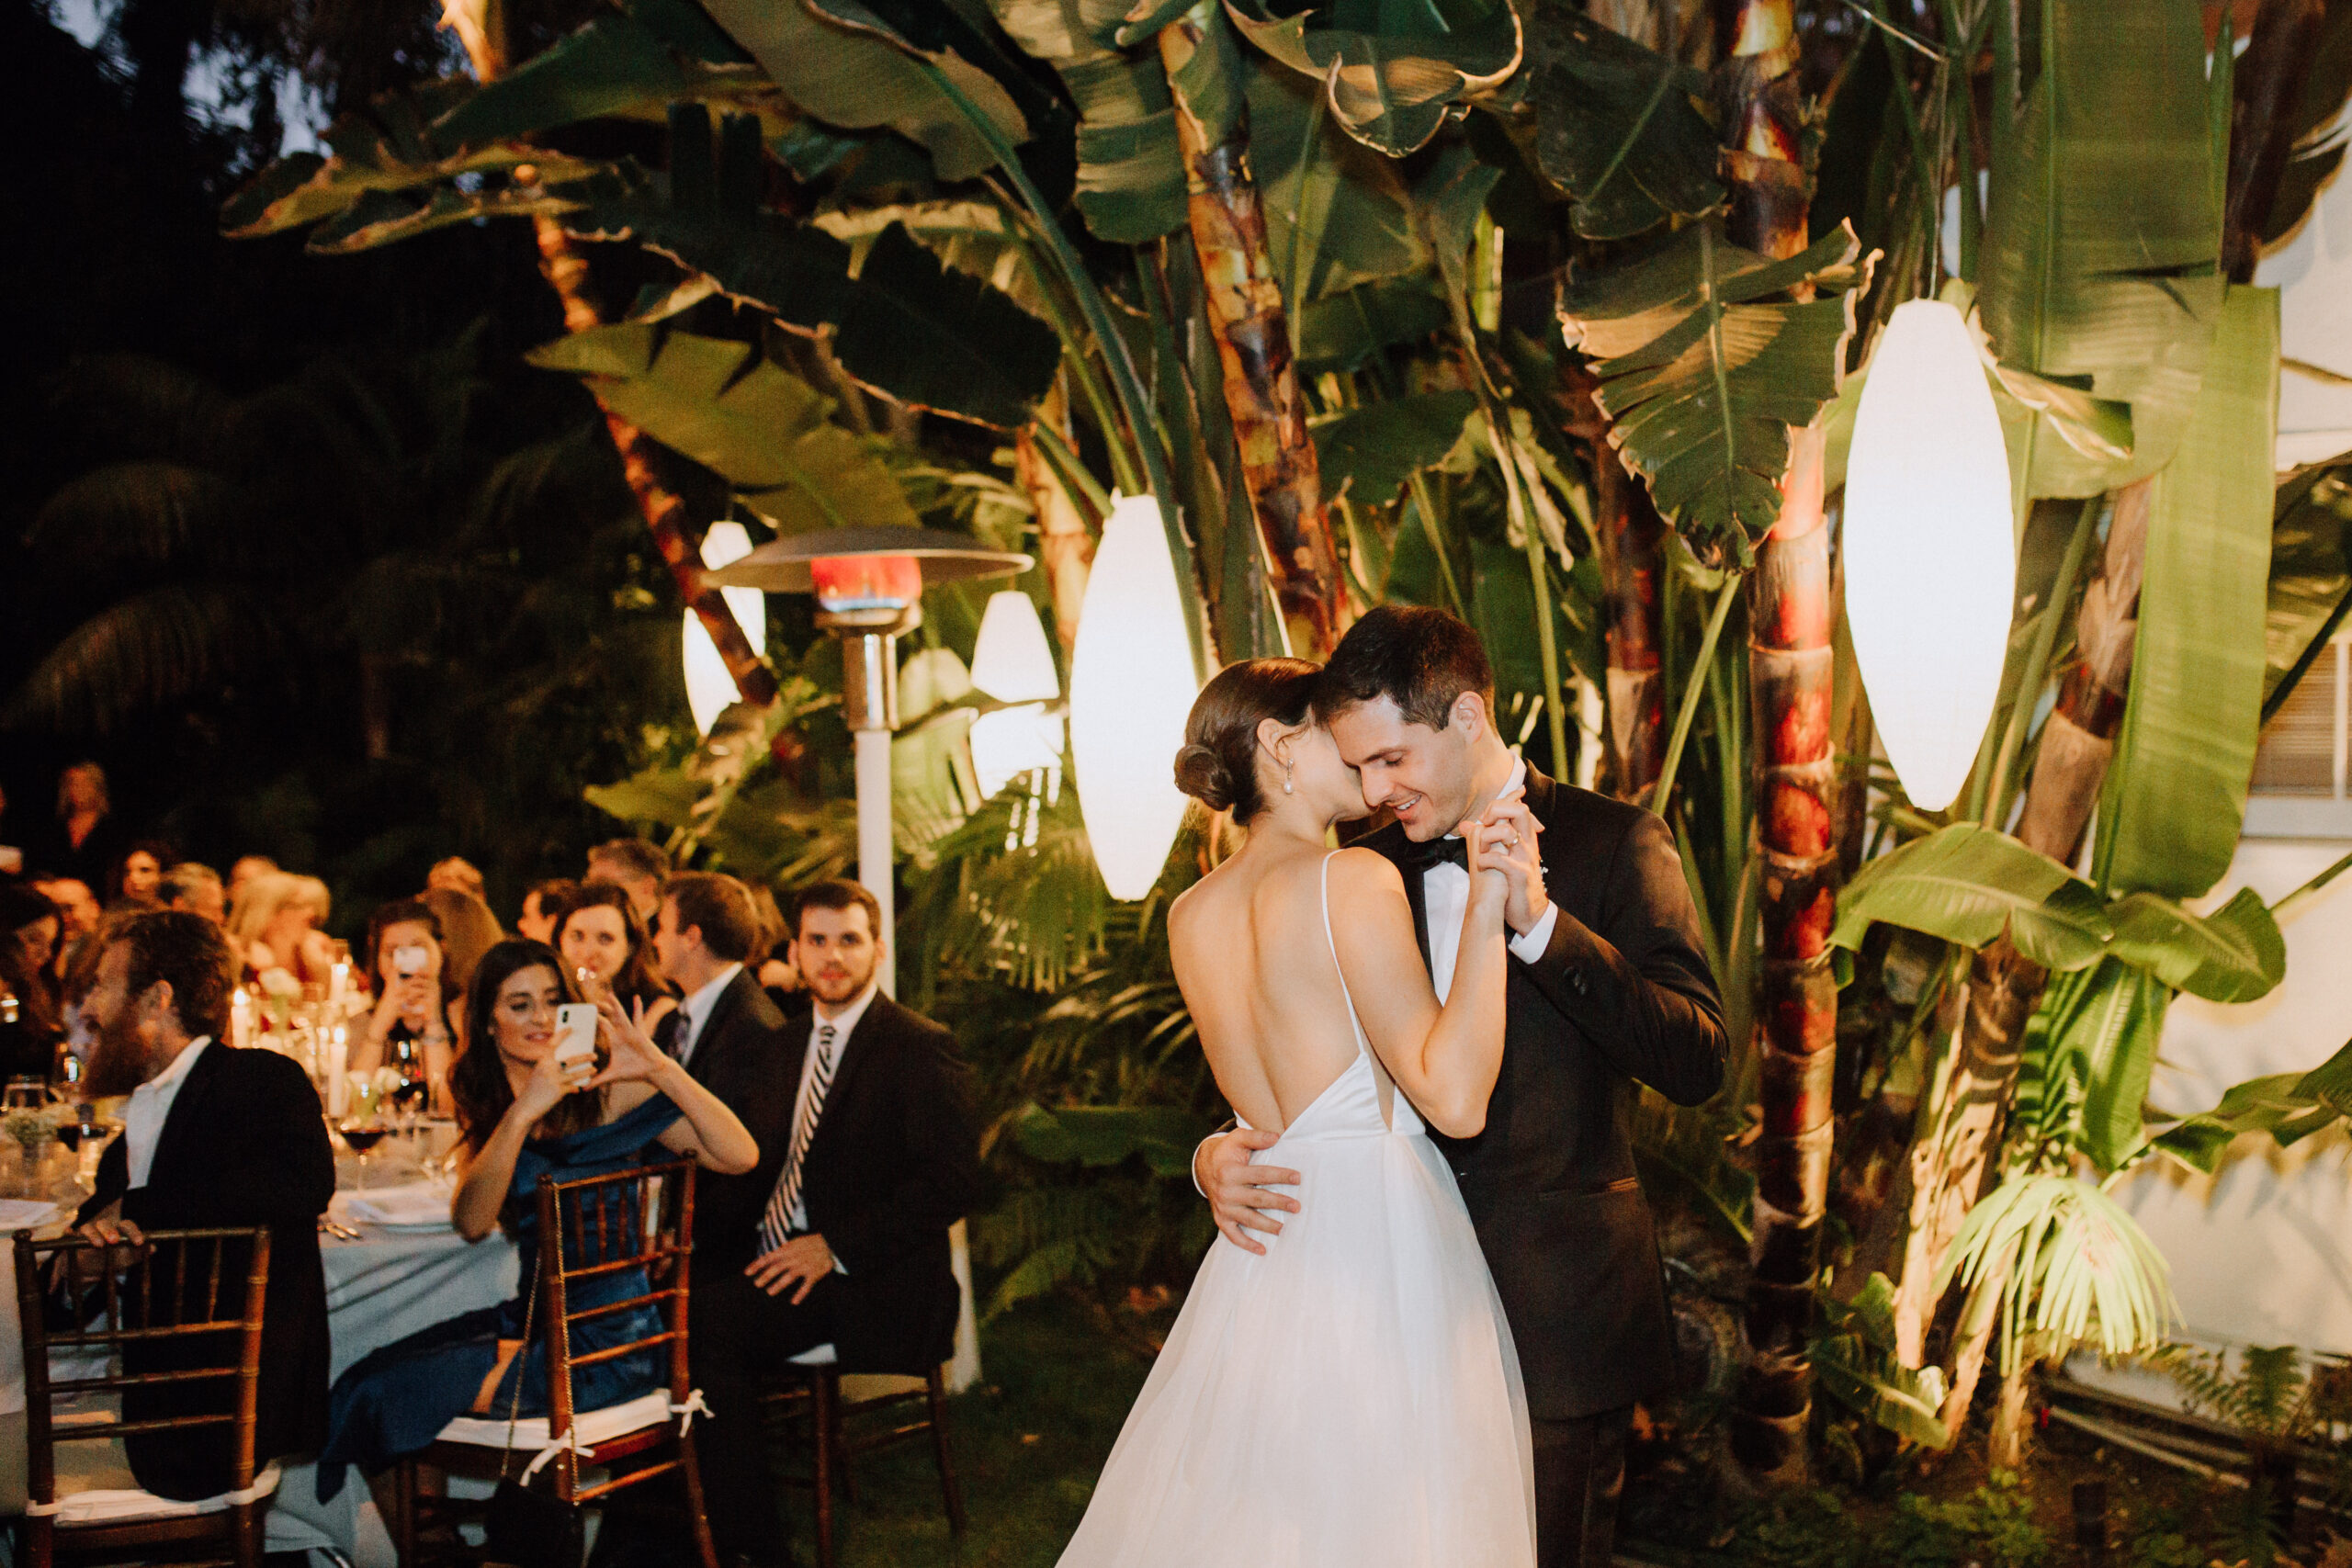 guests look on during the backyard garden wedding reception as the bride and groom share their first dance together